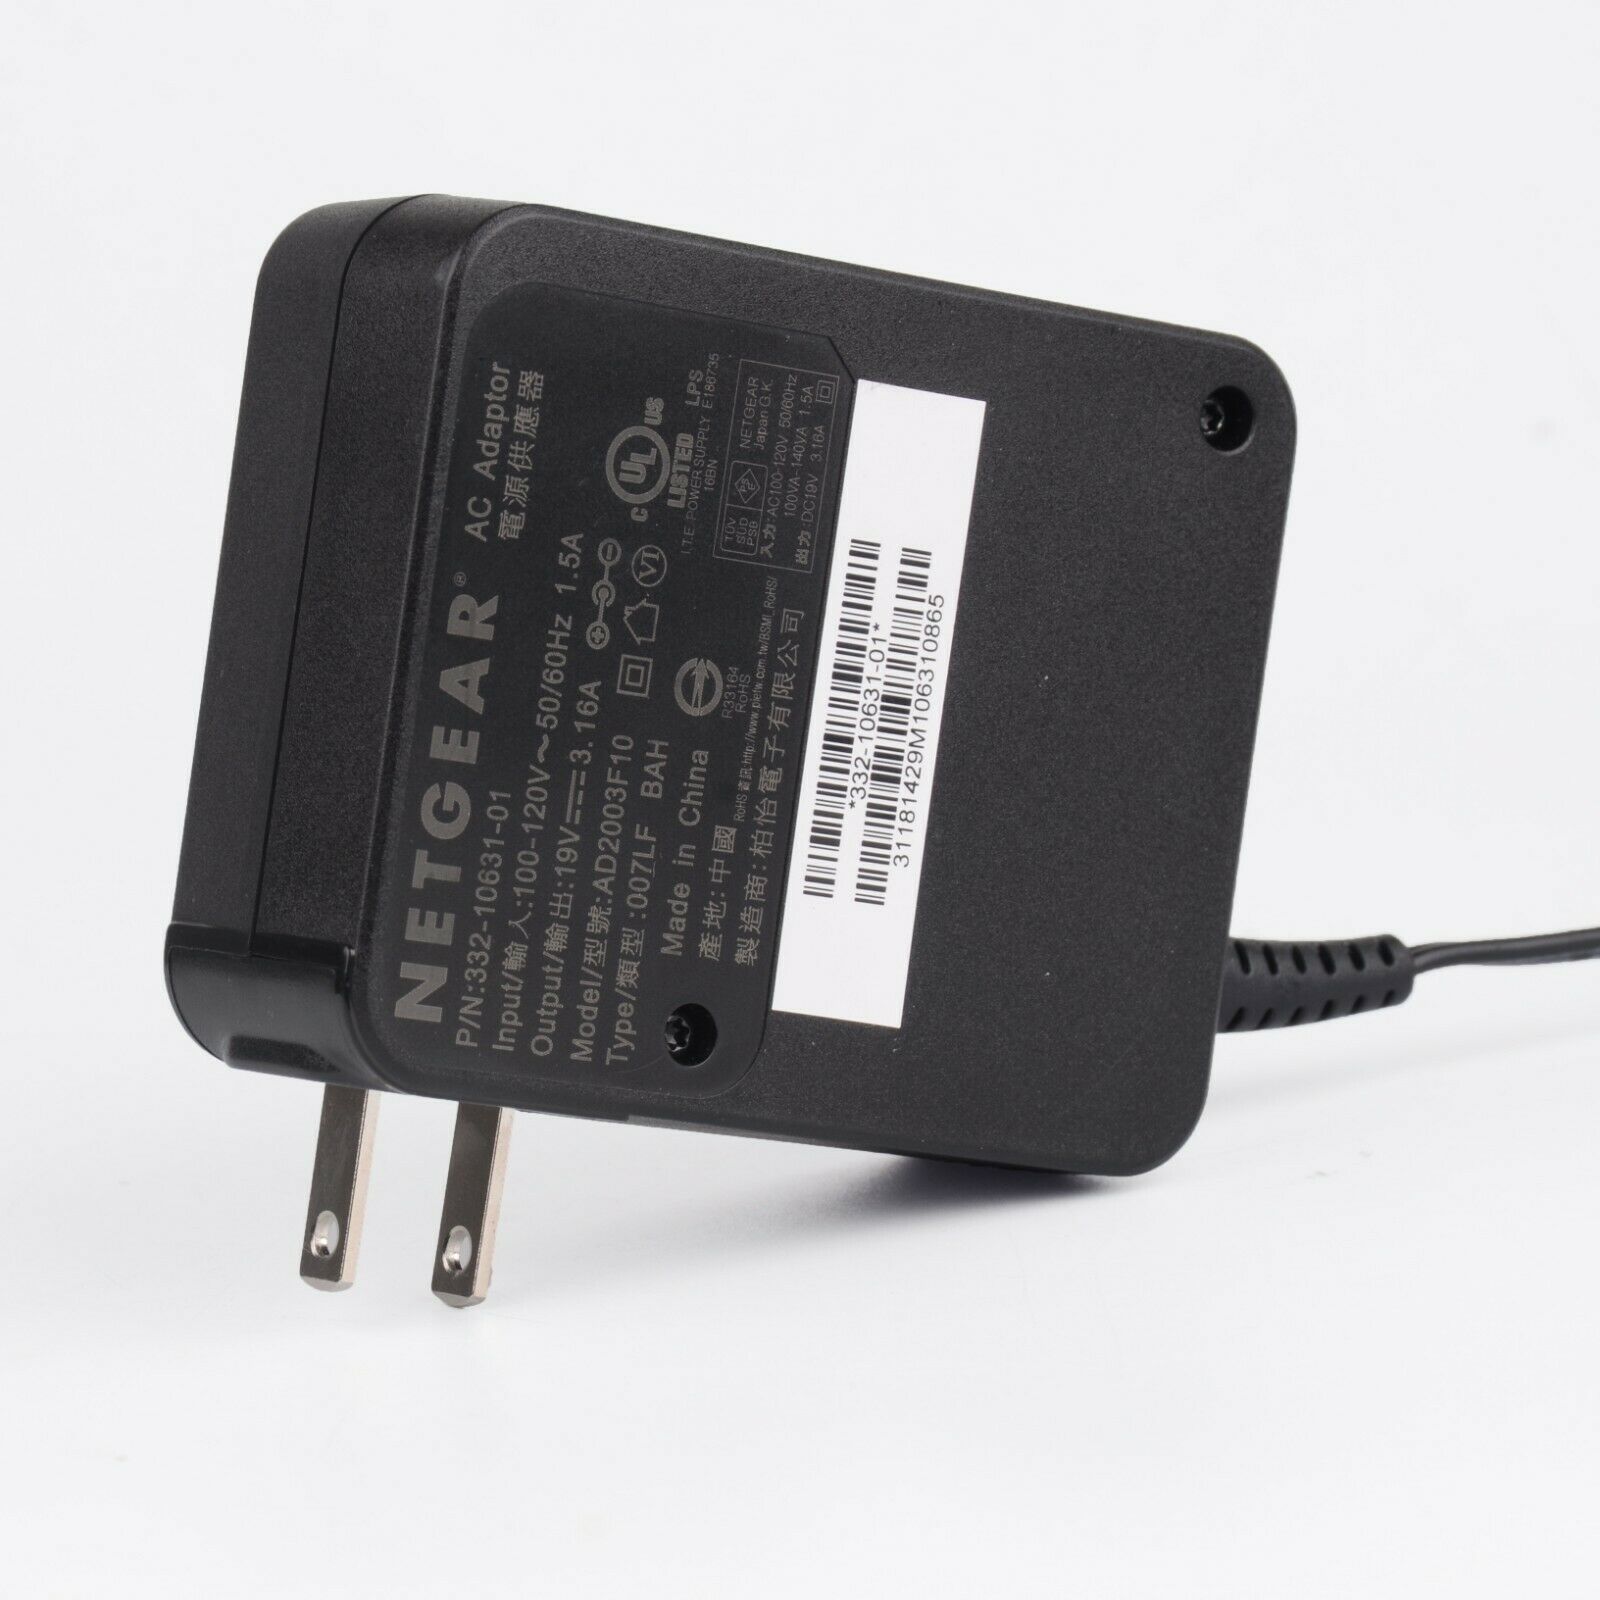 AC Adapter For NETGEAR Wifi Router R8500 R8000 X8 AC5300 R9000 19V 3.16A 120V Type: AC/DC Adapter Features: Powere